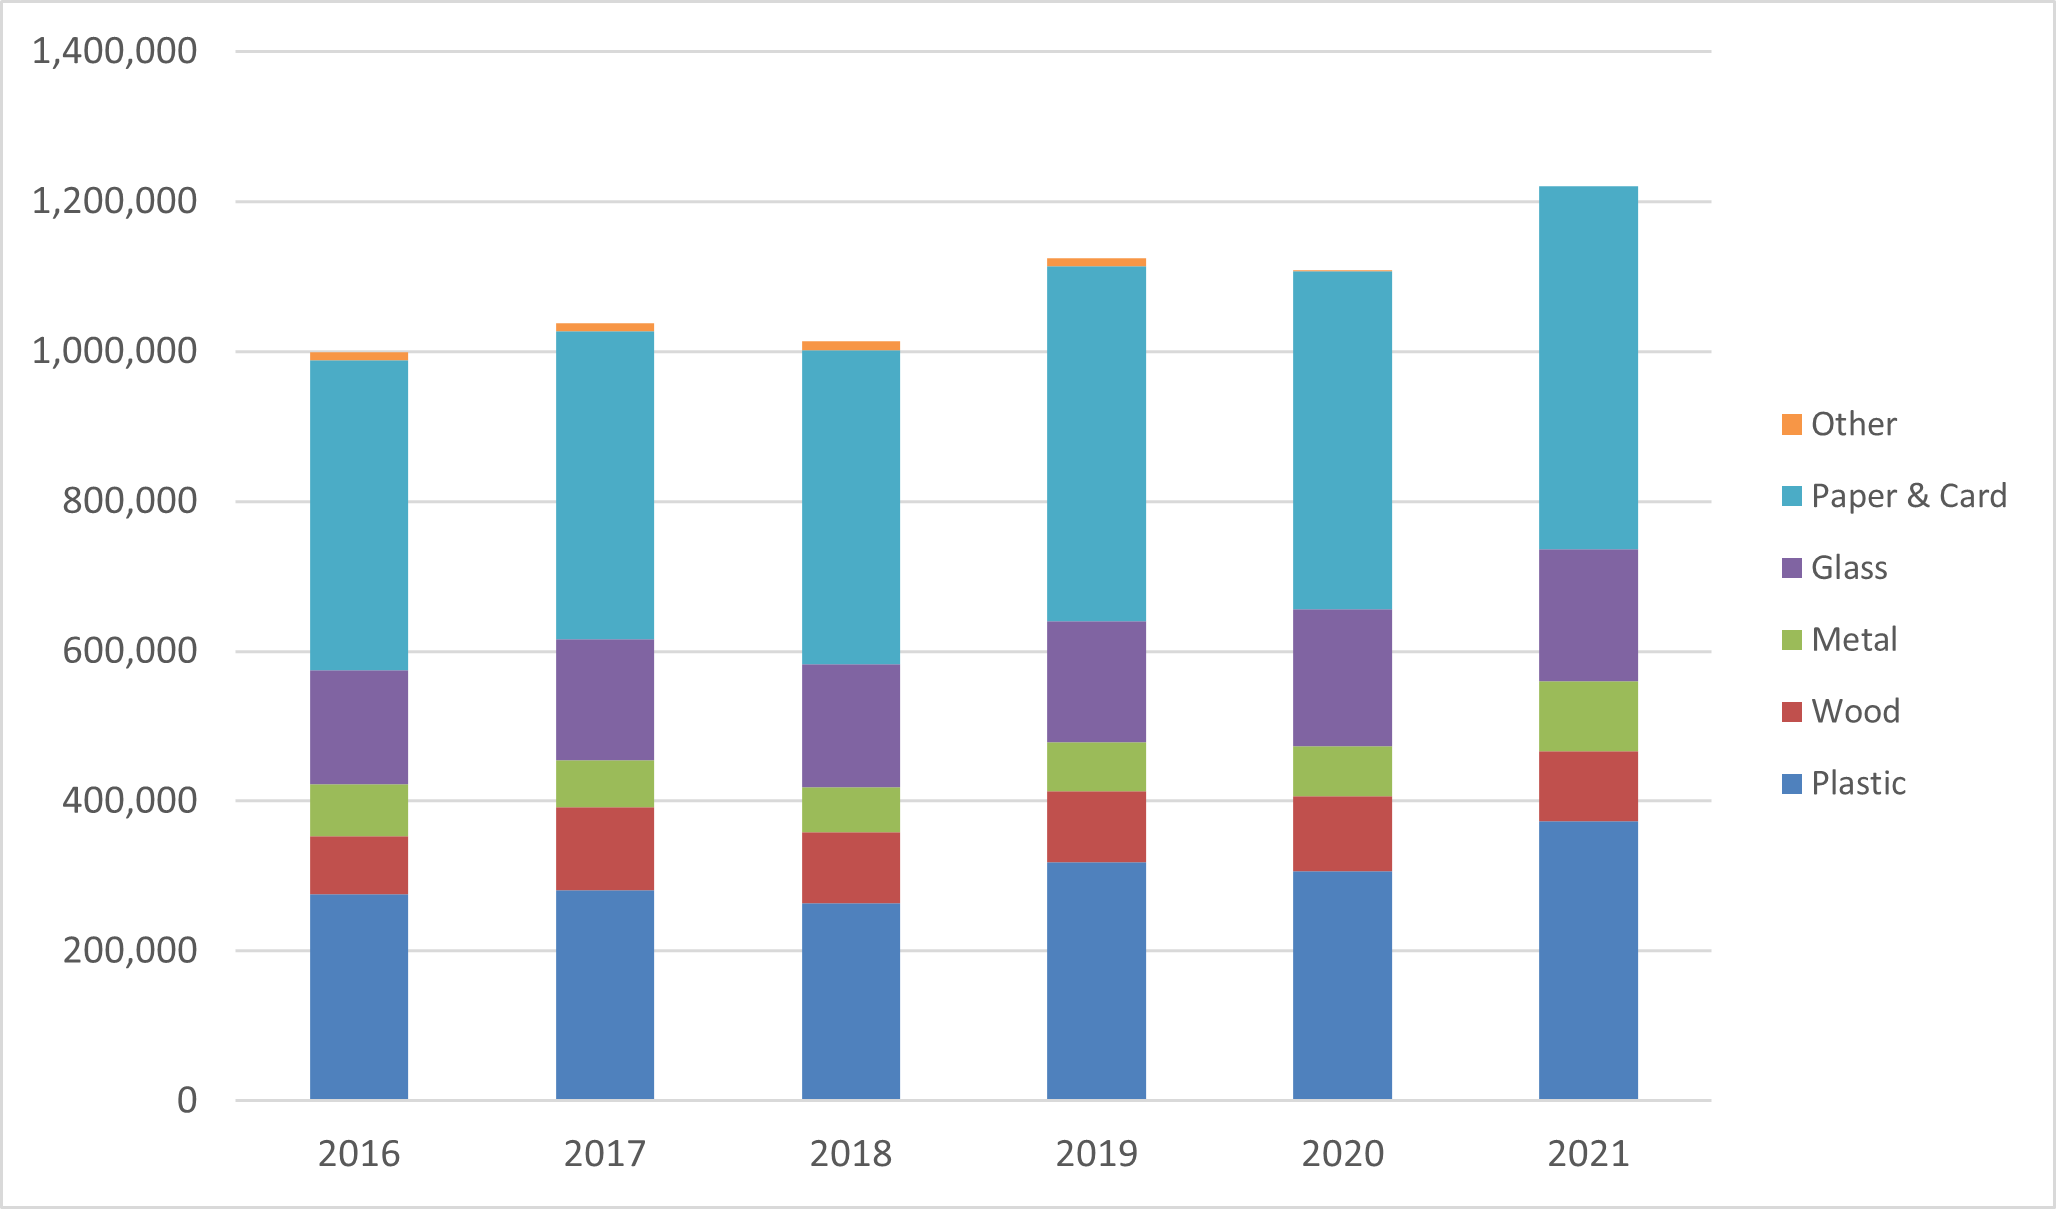 This is a bar chart showing tonnes of packaging waste generation per year.  The chart shows an increasing trend from 2016 to 2021